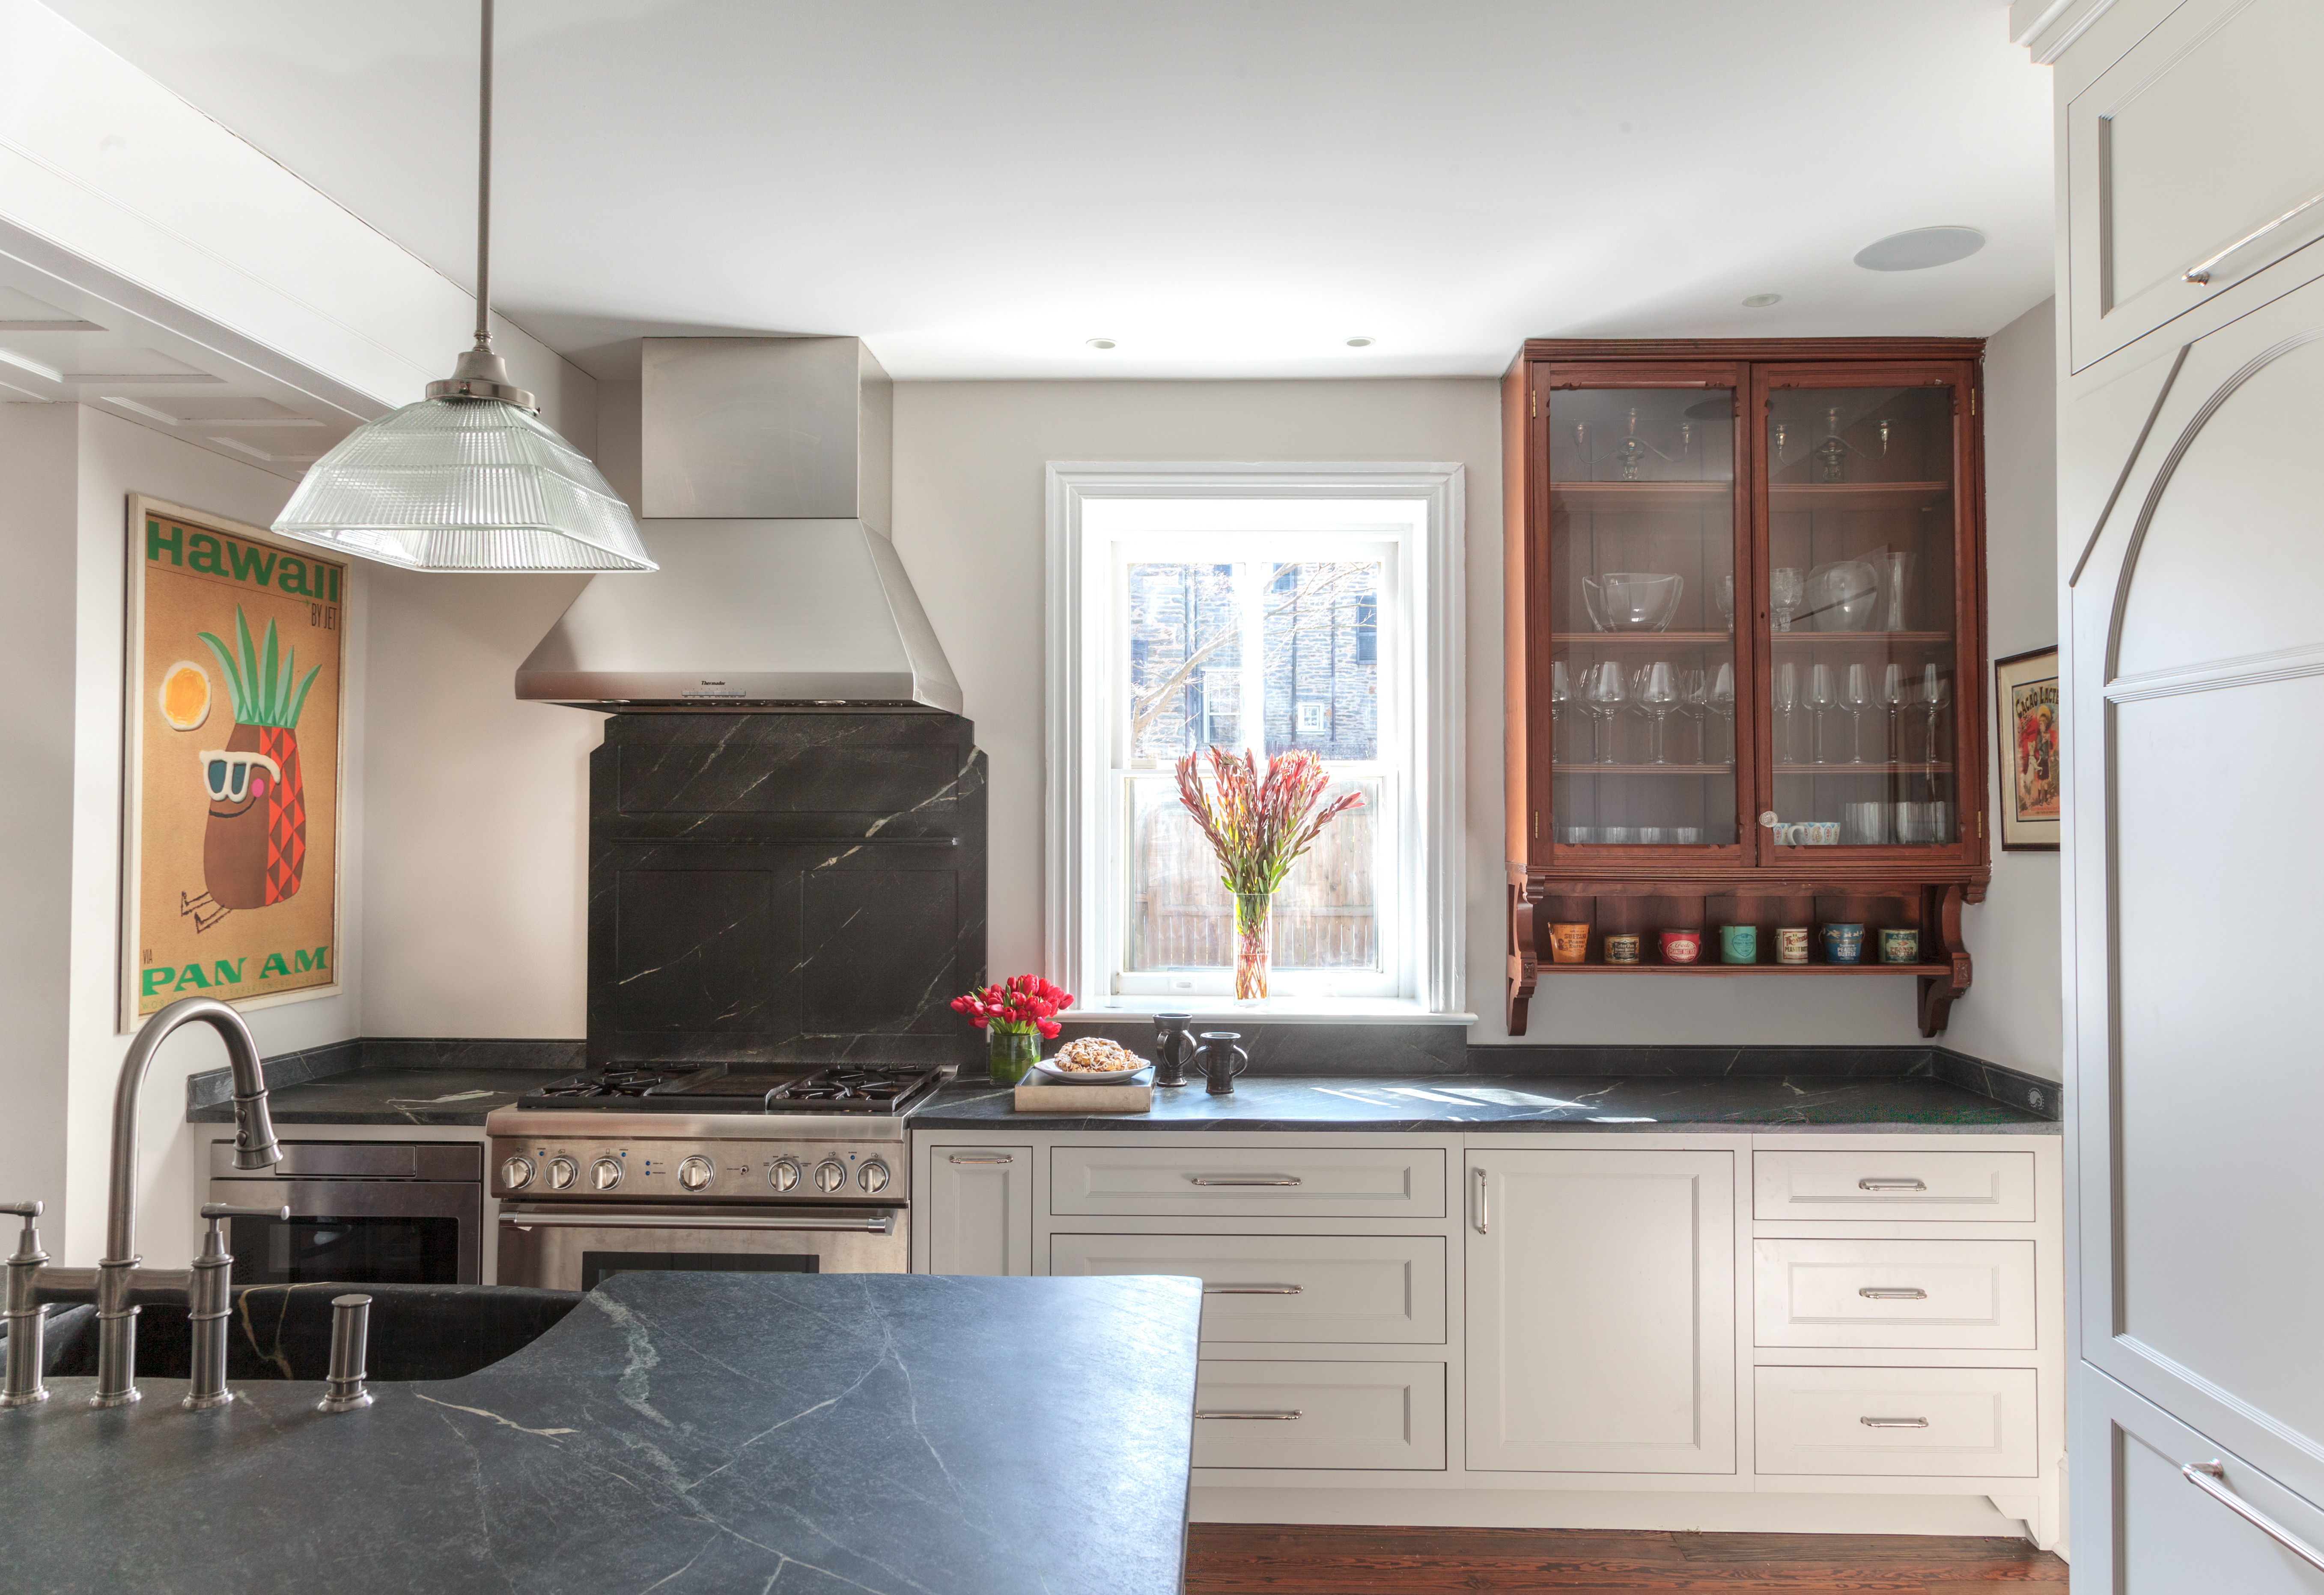 “This look started with an idea about restoring and emphasizing some of the historic elements of the original 1863 house while creating a more modern, functional, and beautiful kitchen,” says Mindy O’Connor of Melinda Kelson O’Connor Architecture & Interiors. “Start with one or two dominating features. Here, the refinished American walnut-and-glass cabinet and the soapstone countertops and sink are the stars.” While the cabinets are finished in a neutral hue, it’s one that’s softer and less in-your-face than white would be here. “Mixing natural materials like wood and dark stone complements almost any color choice,” Mindy notes, “and adds warm and natural touches to the space.” Photo by Wendy Concannon Photography.
